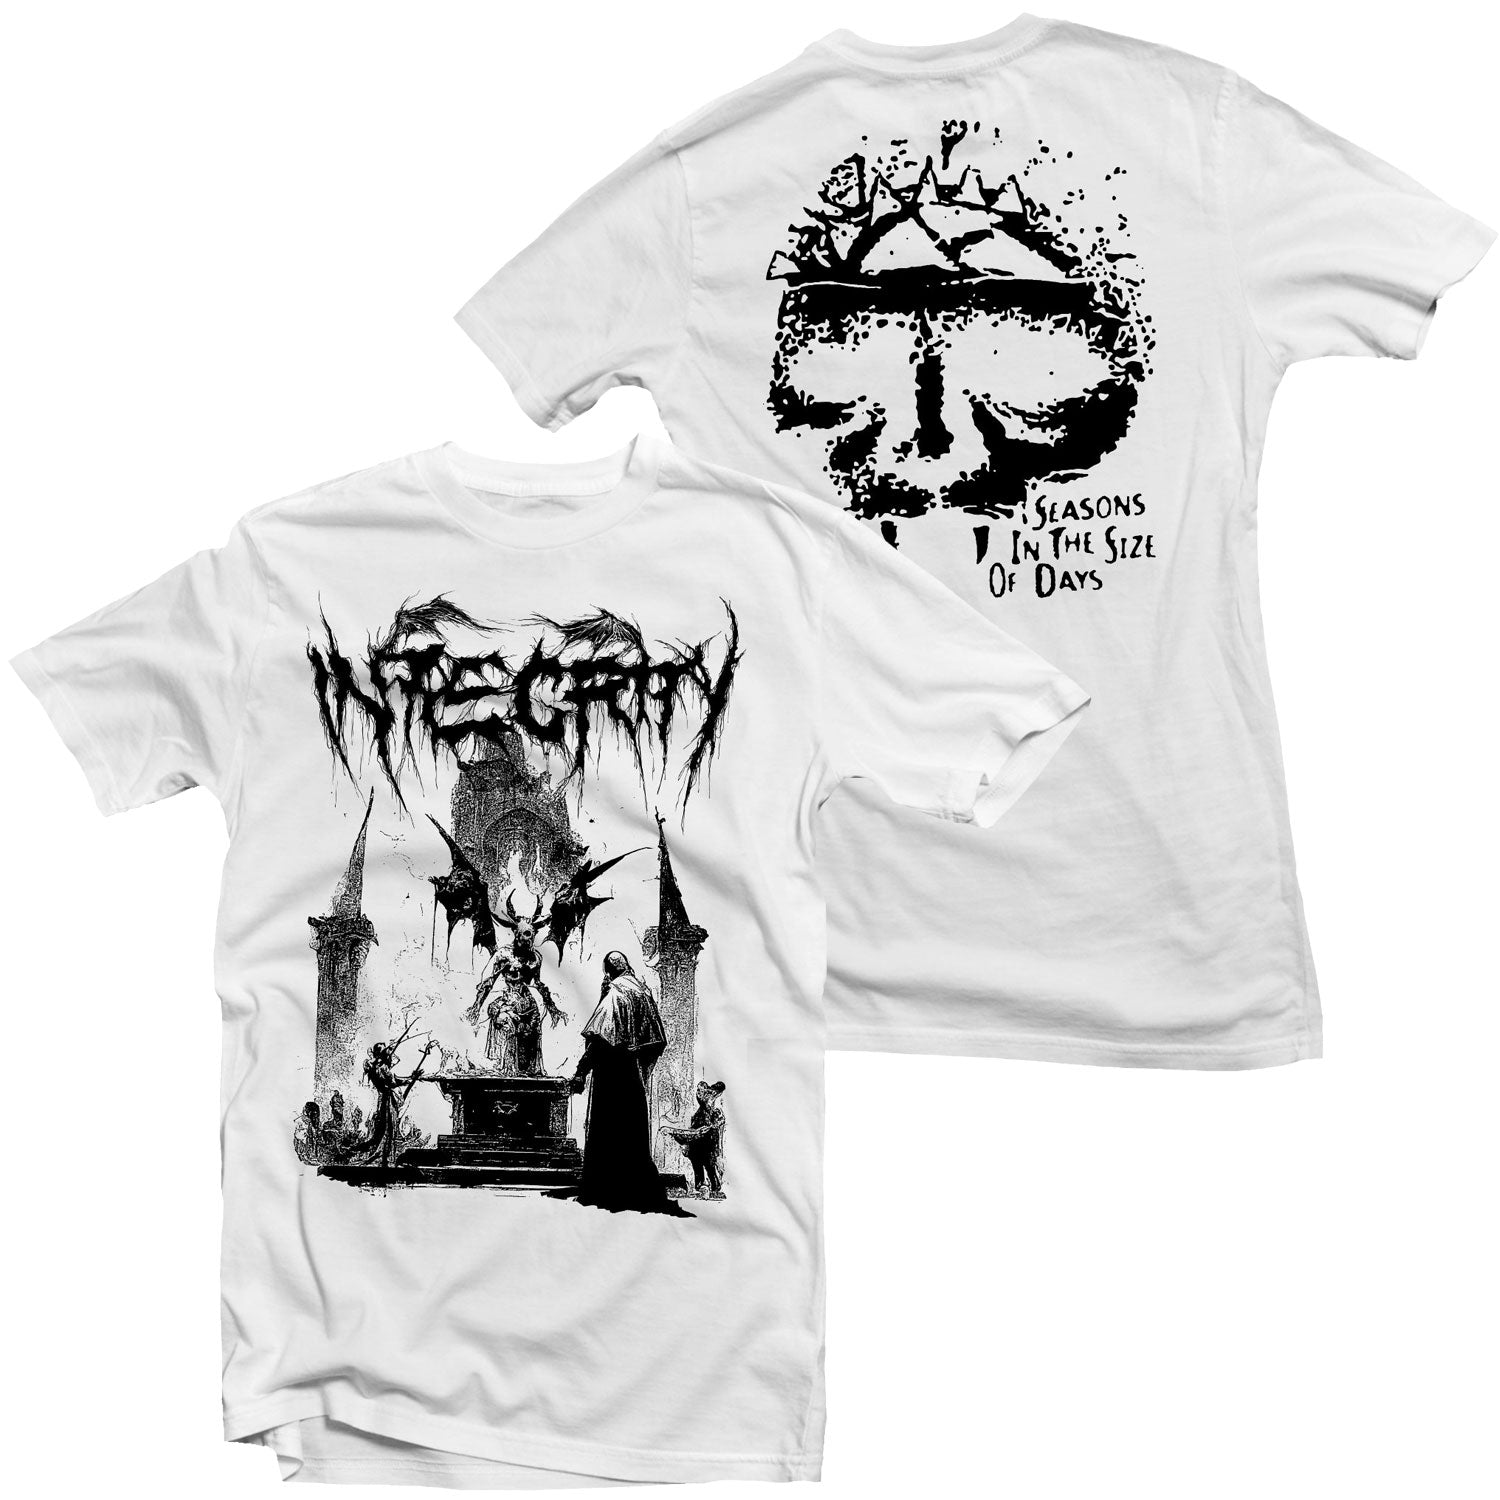 Integrity "Seasons in the Size of Days (Reissue)" T-Shirt